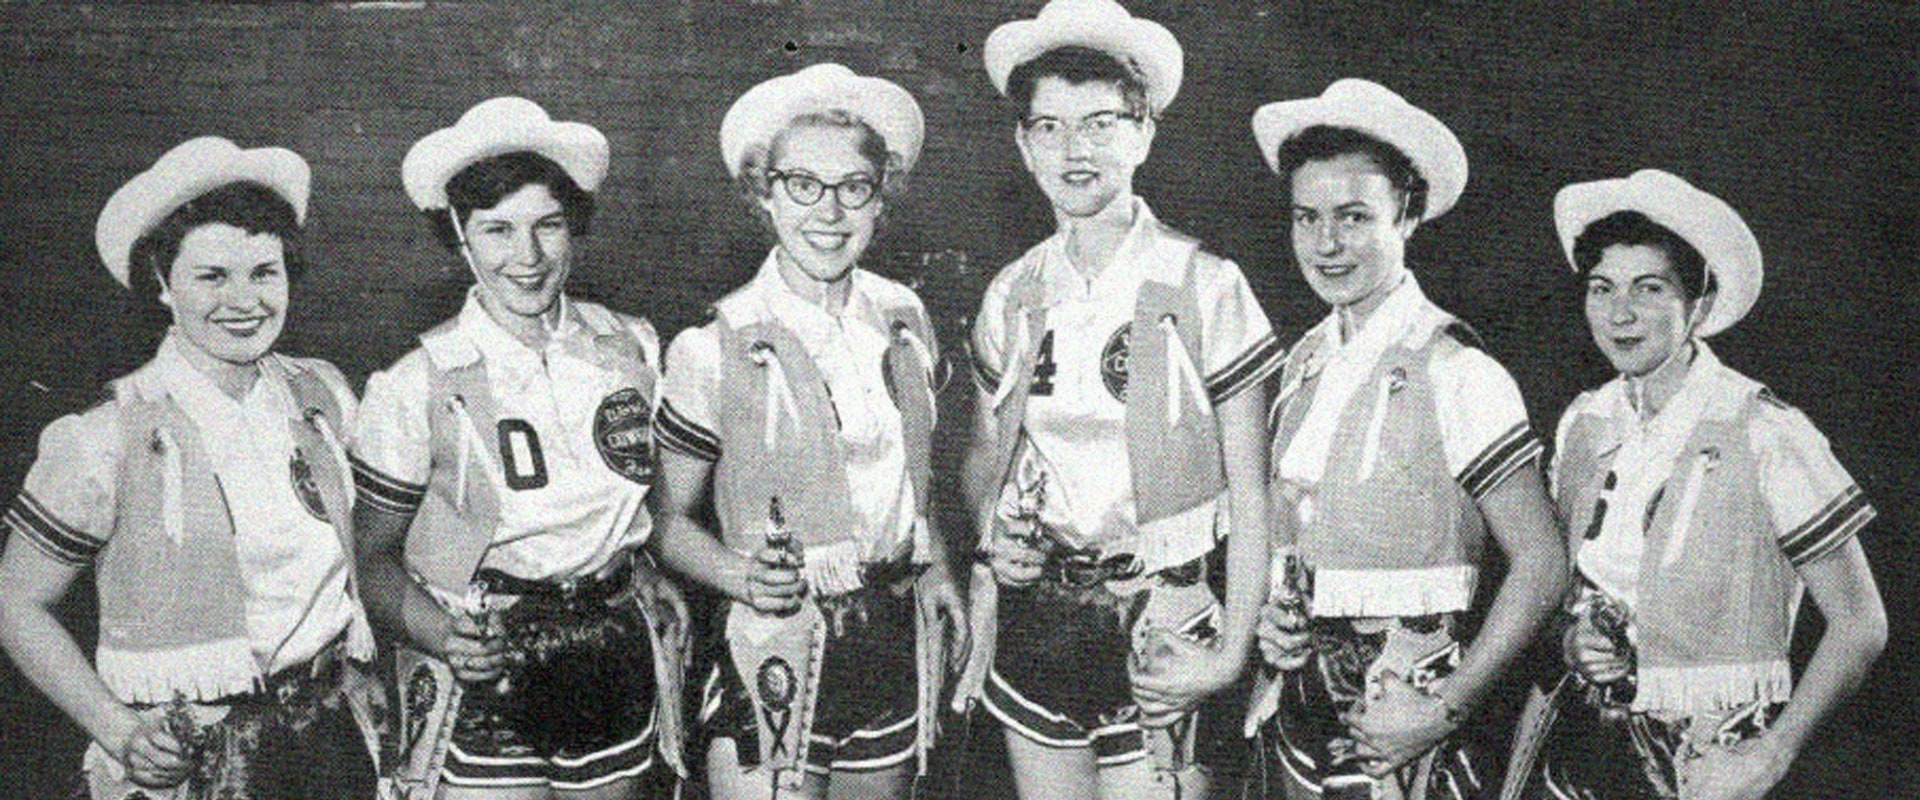 The Evolution of Women's Sports in Northeastern Texas